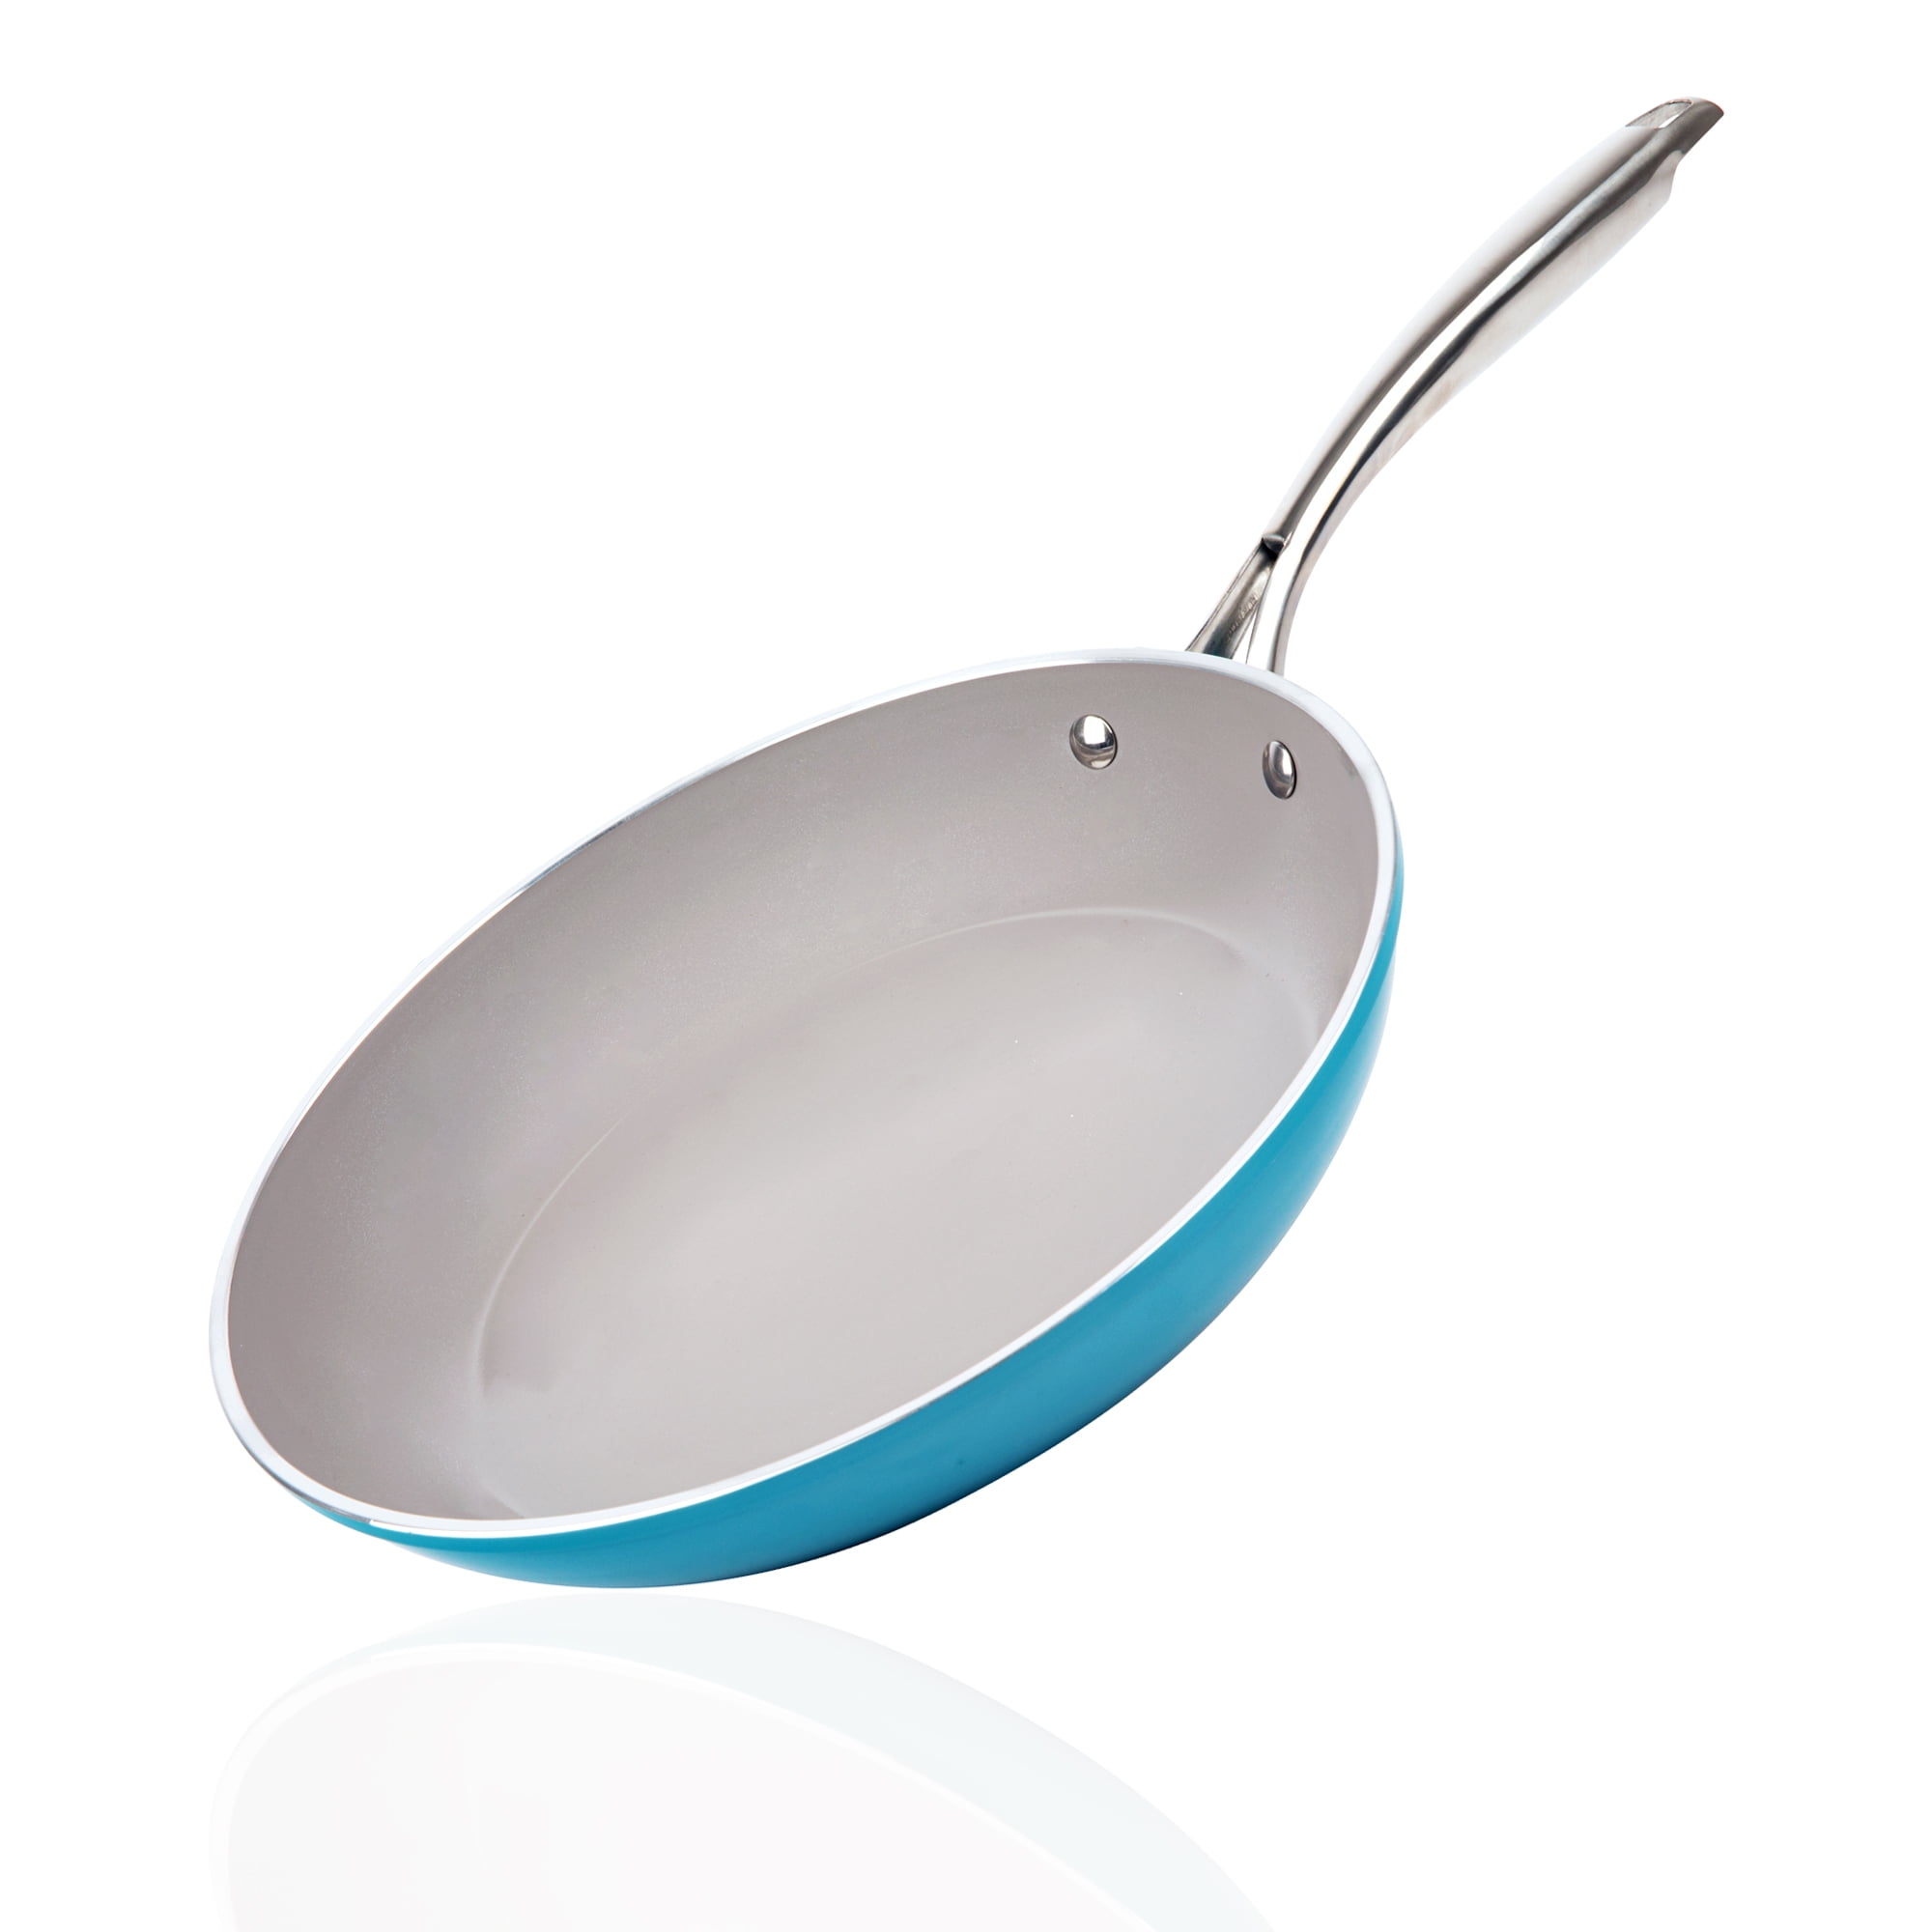 Cook + Create Nonstick Frying Pans 14-inch / Agave Blue